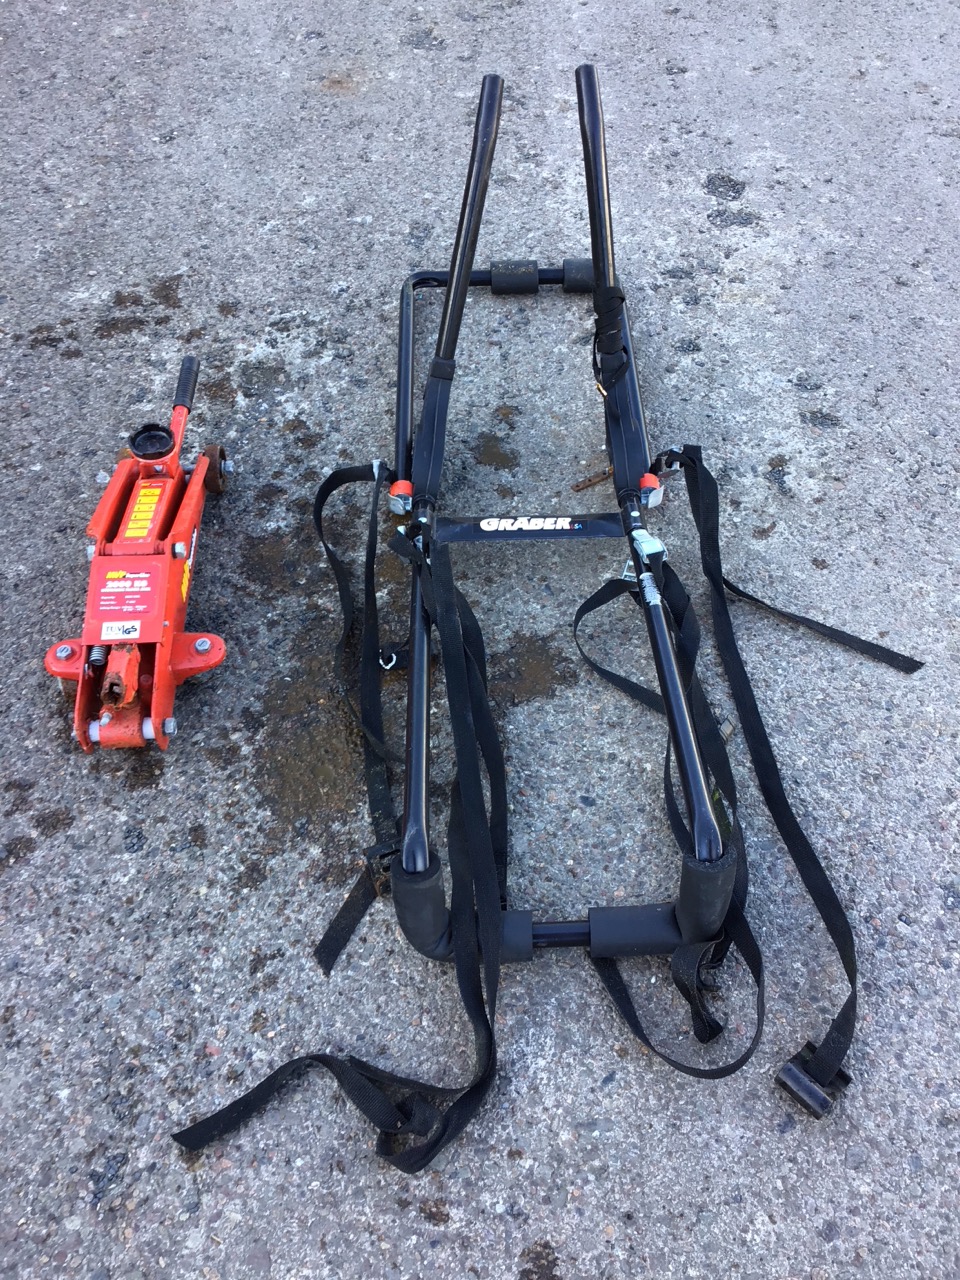 An MVP SuperLine 2000kg hand pumped hydraulic jack; and a Graber tubular steel car bicycle rack. (